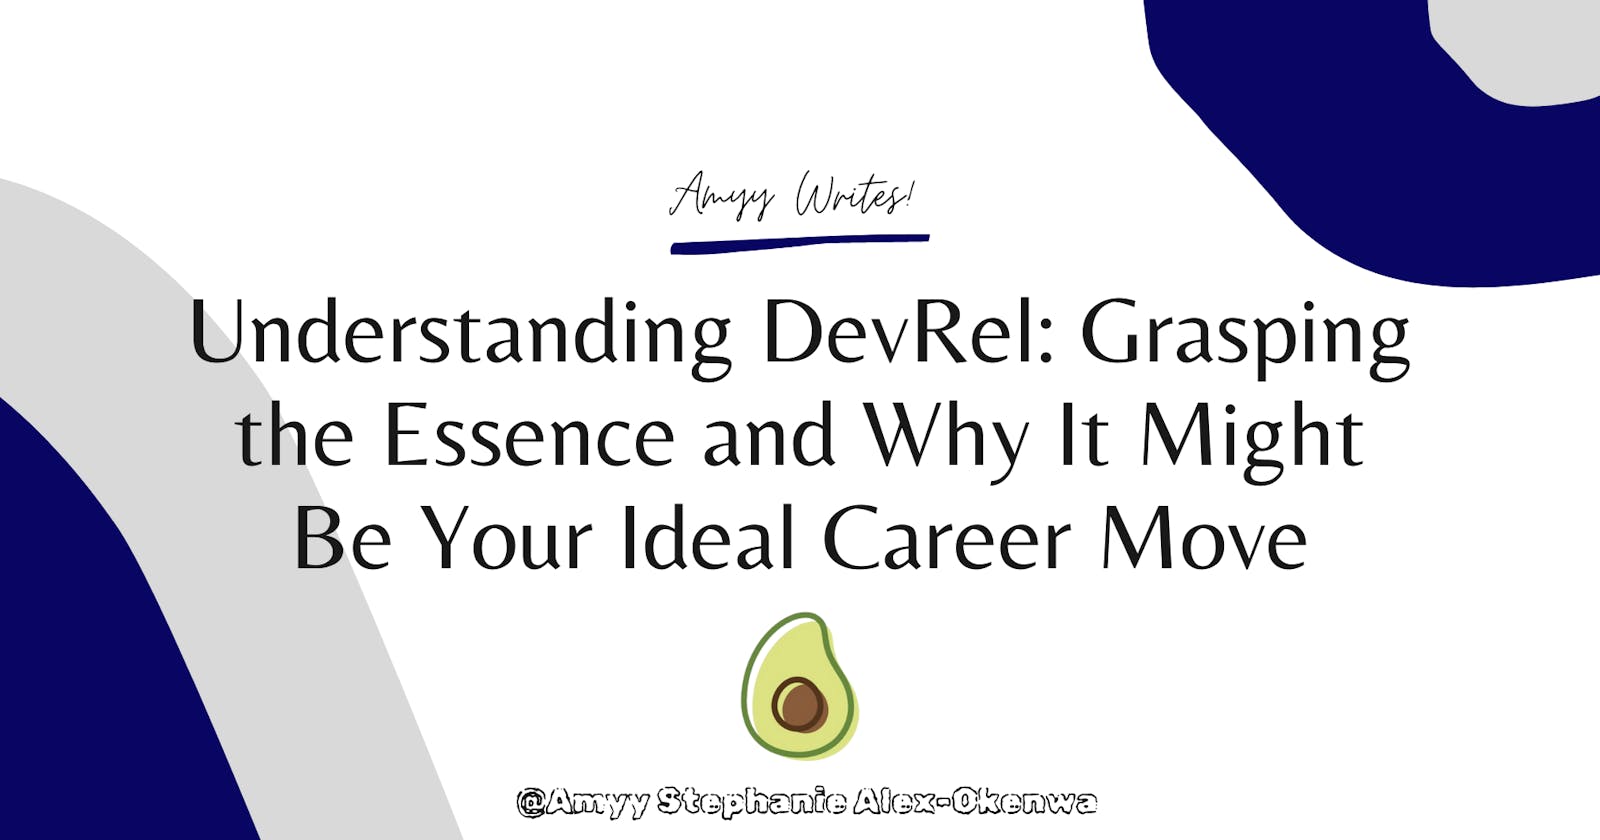 Understanding DevRel: Grasping the Essence and Why It Might Be Your Ideal Career Move